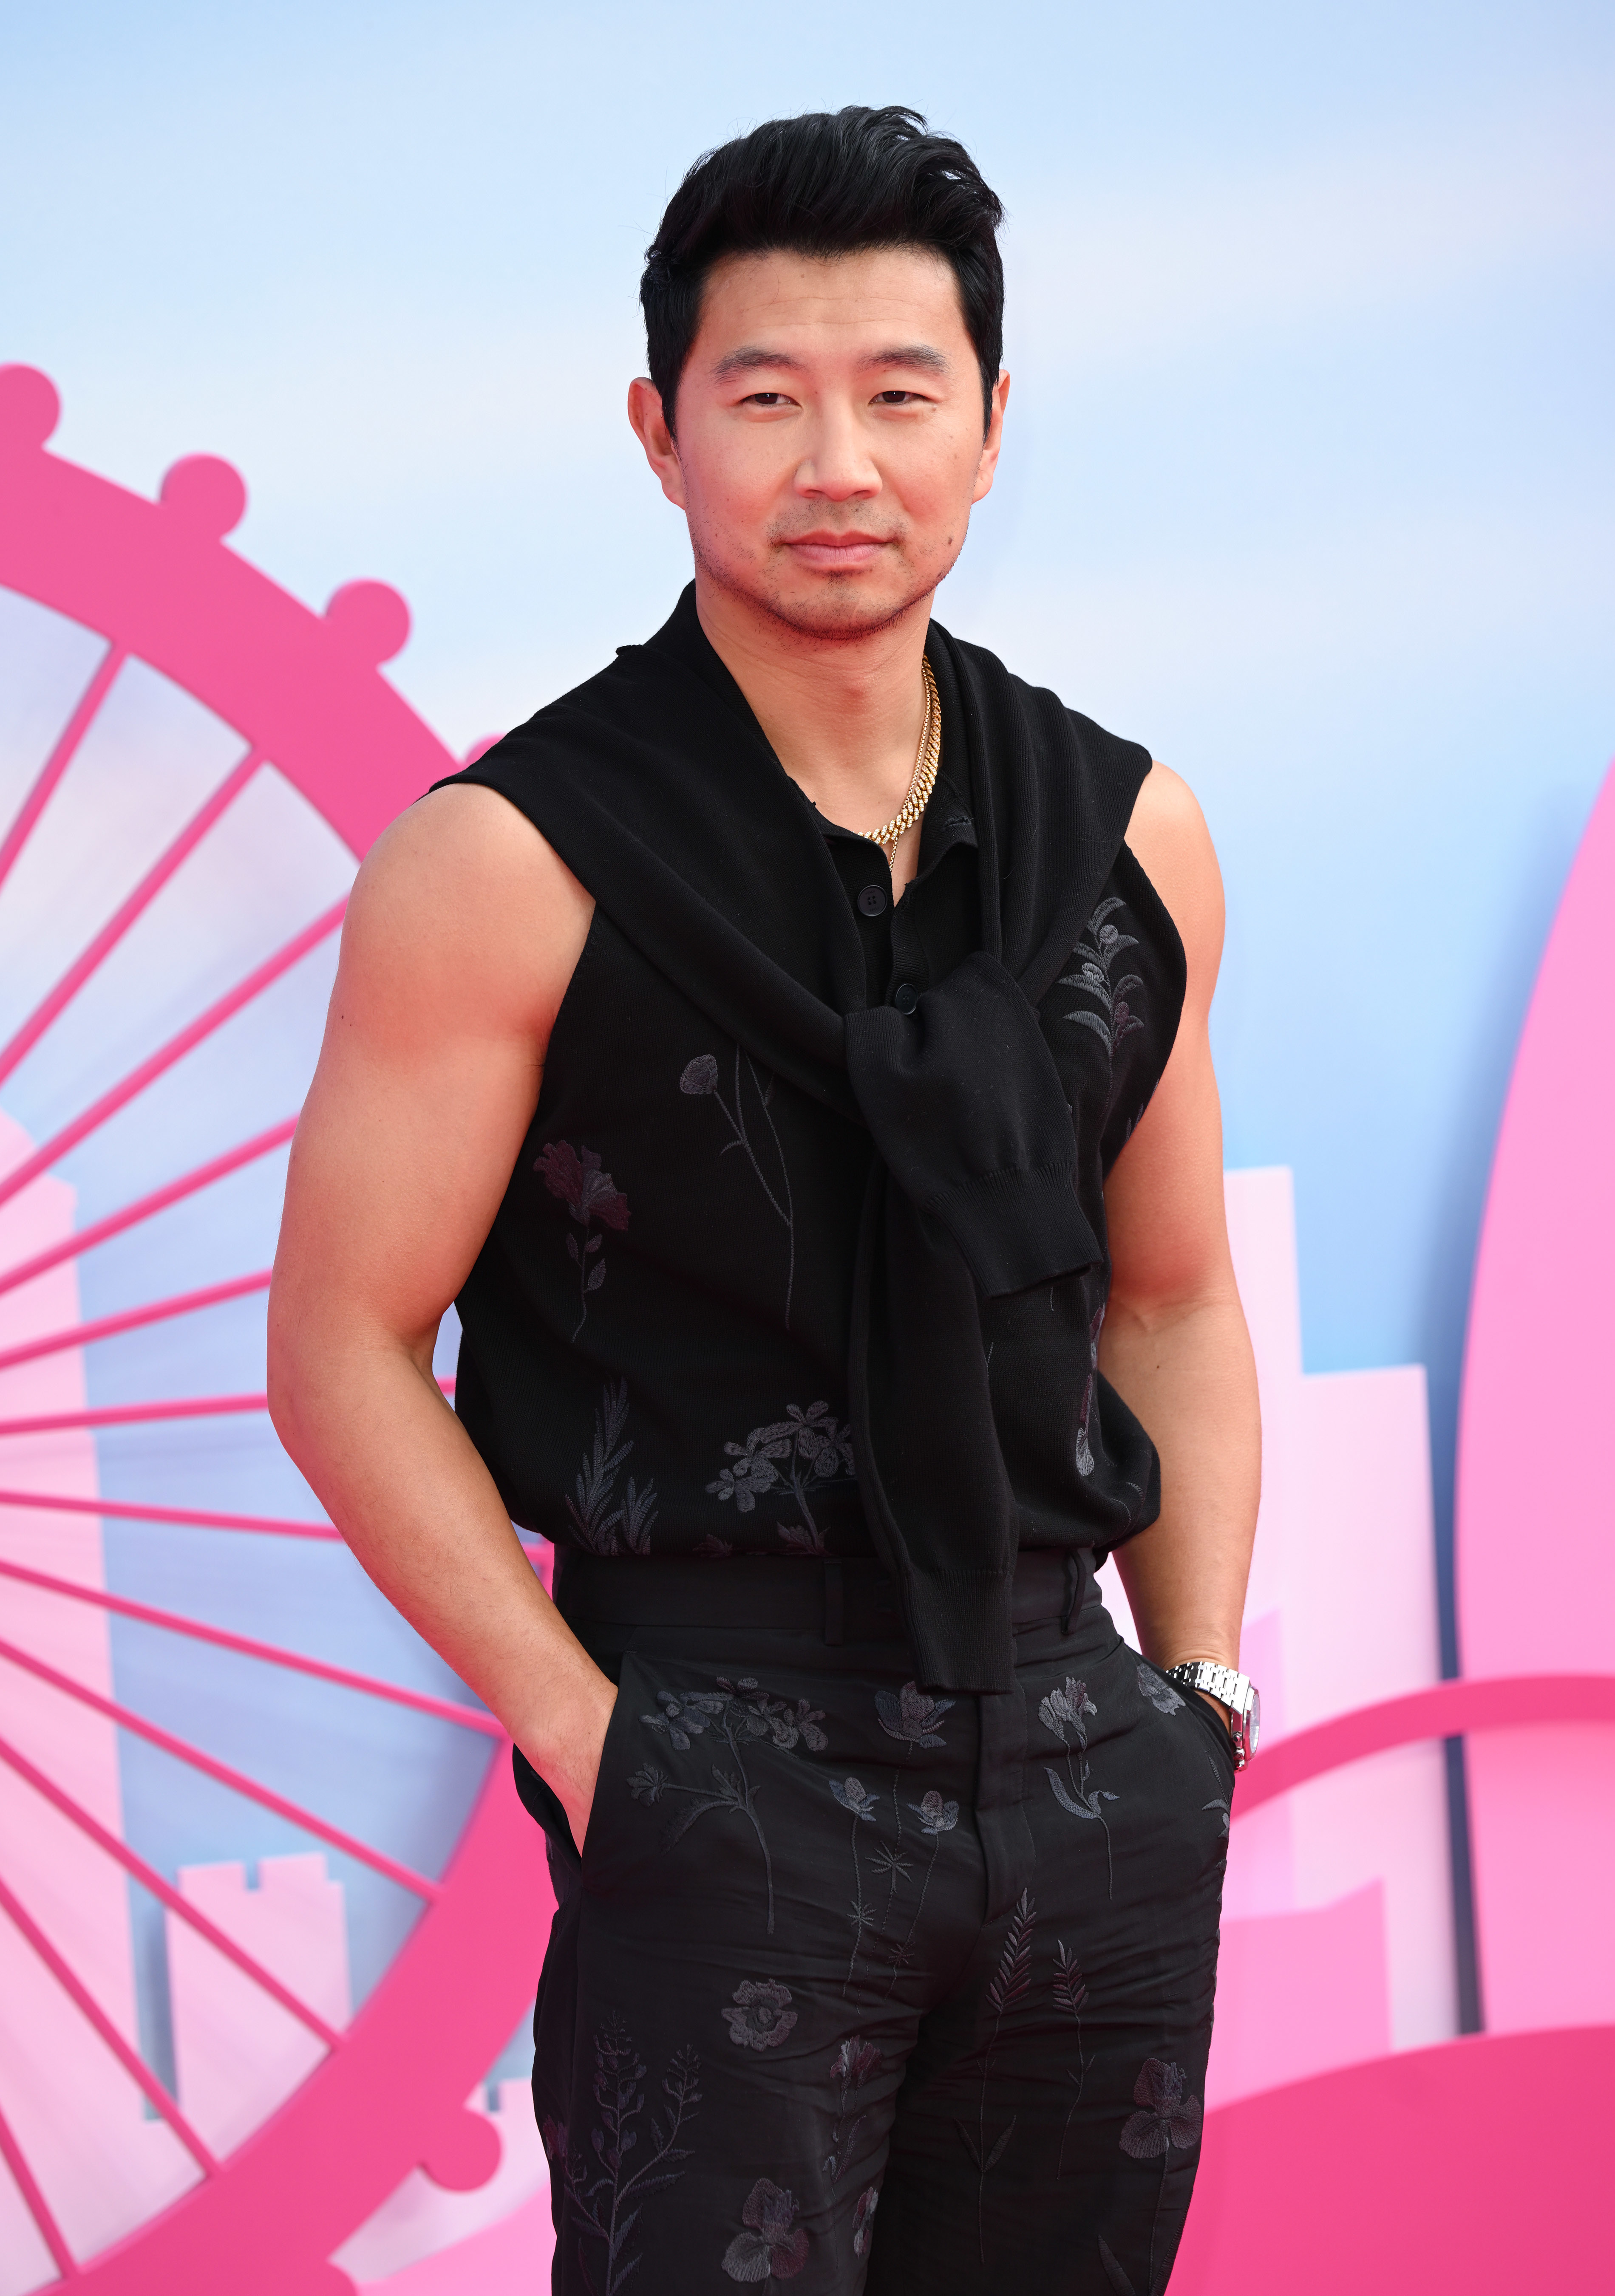 him at the barbie premiere